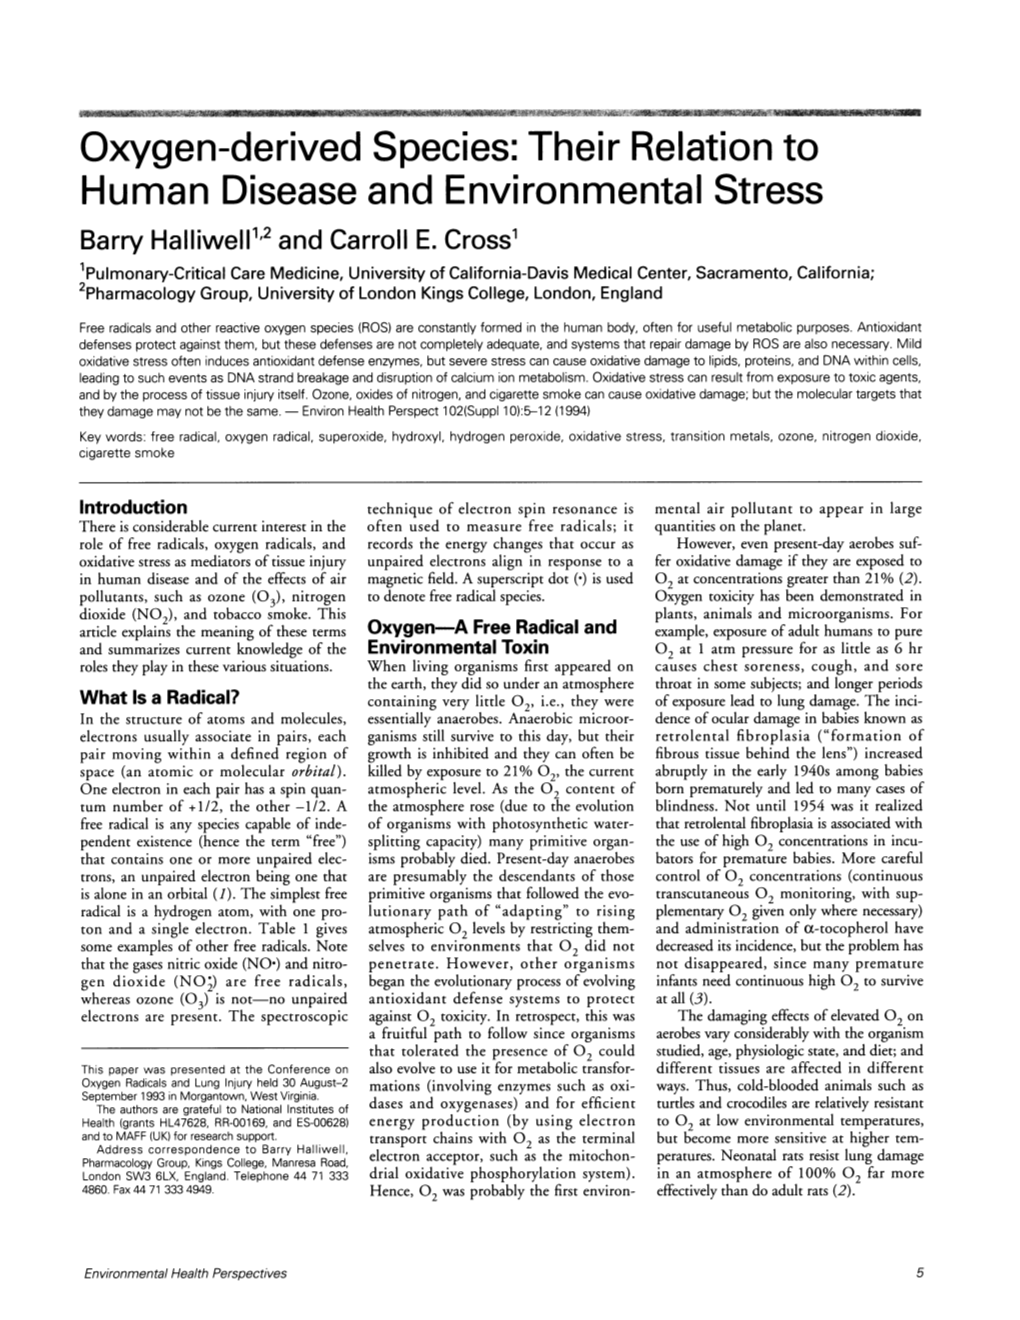 Oxygen-Derived Species: Their Relation to Human Disease and Environmental Stress Barry Halliwell'2 and Carroll E